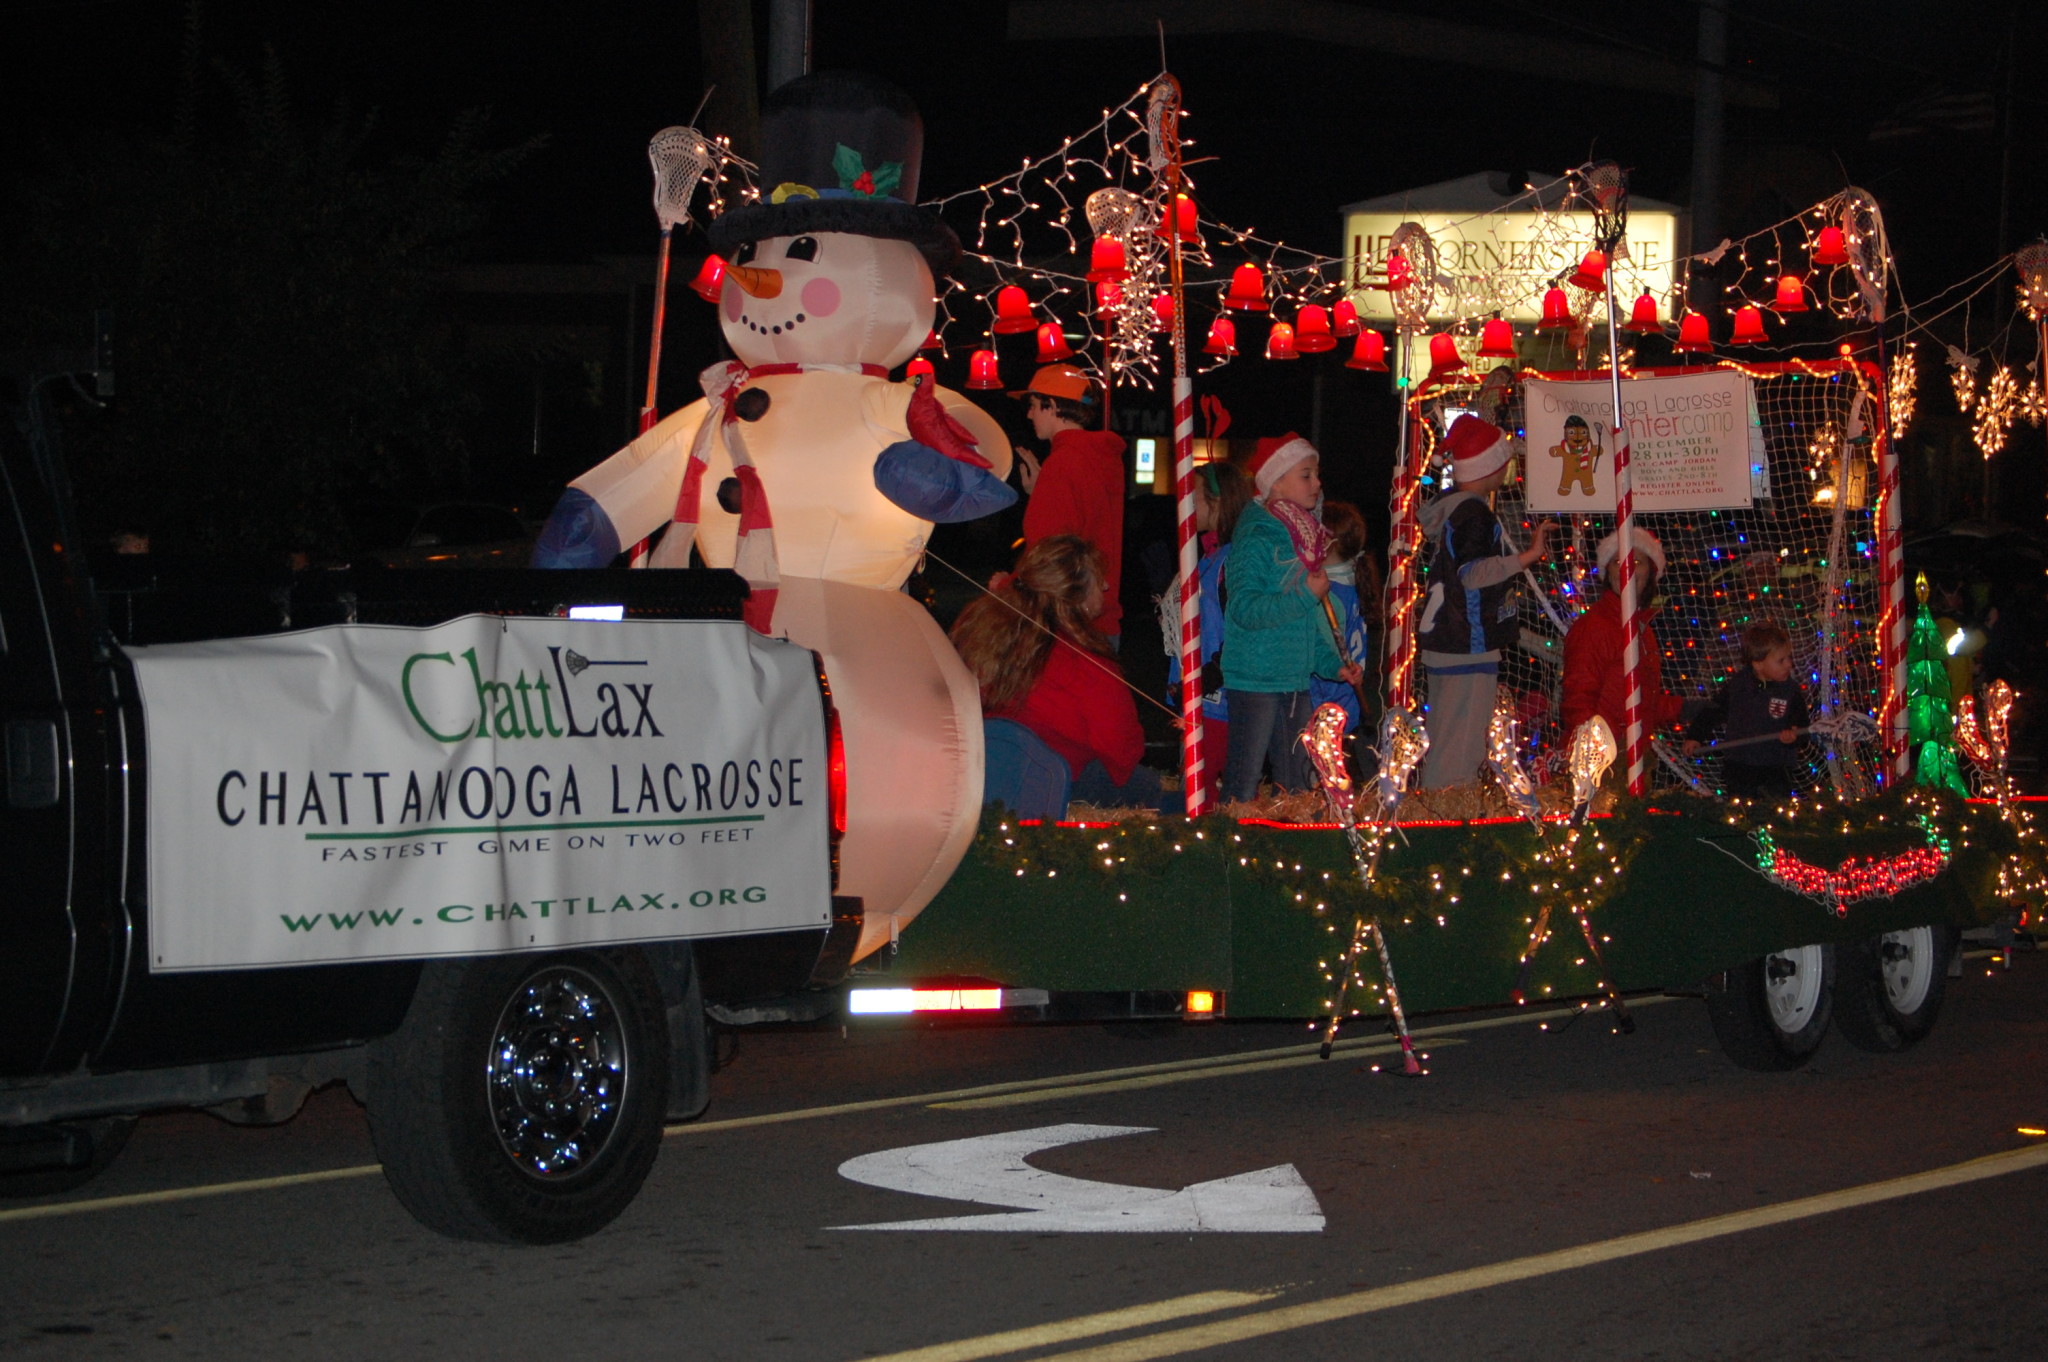 Private Citizens, City Working on Resurrecting Christmas Parade East